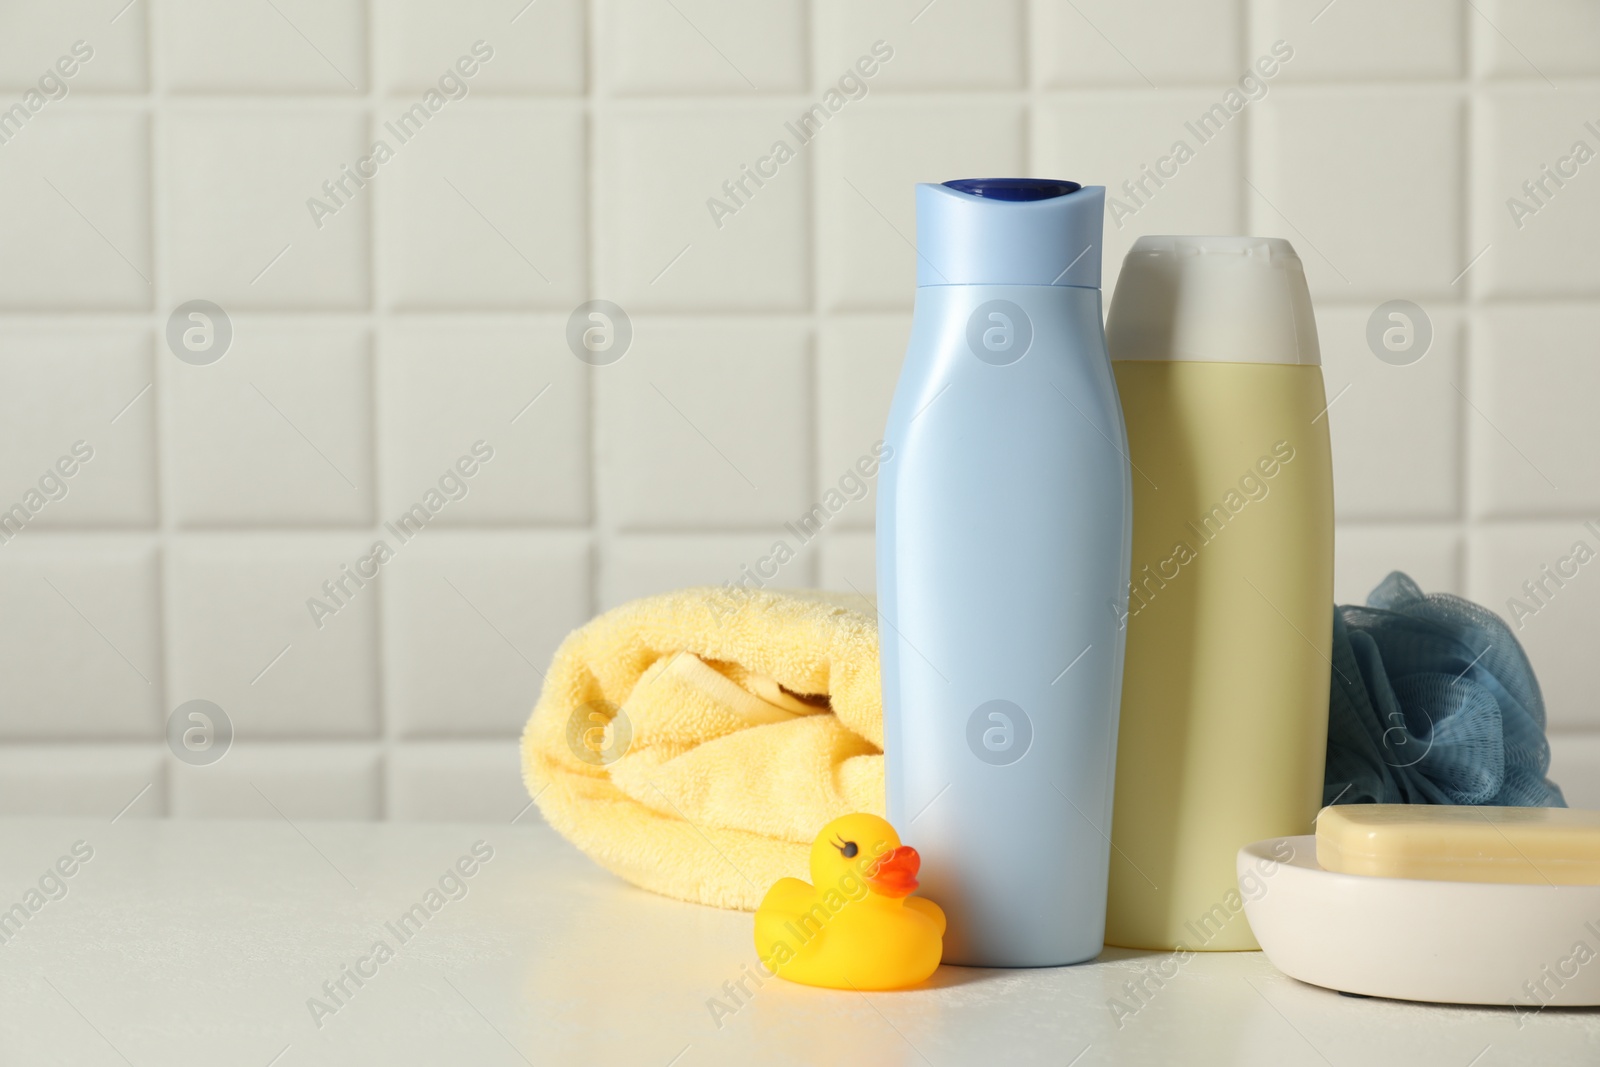 Photo of Baby cosmetic products, bath duck, sponge and towel on white table against tiled wall. Space for text